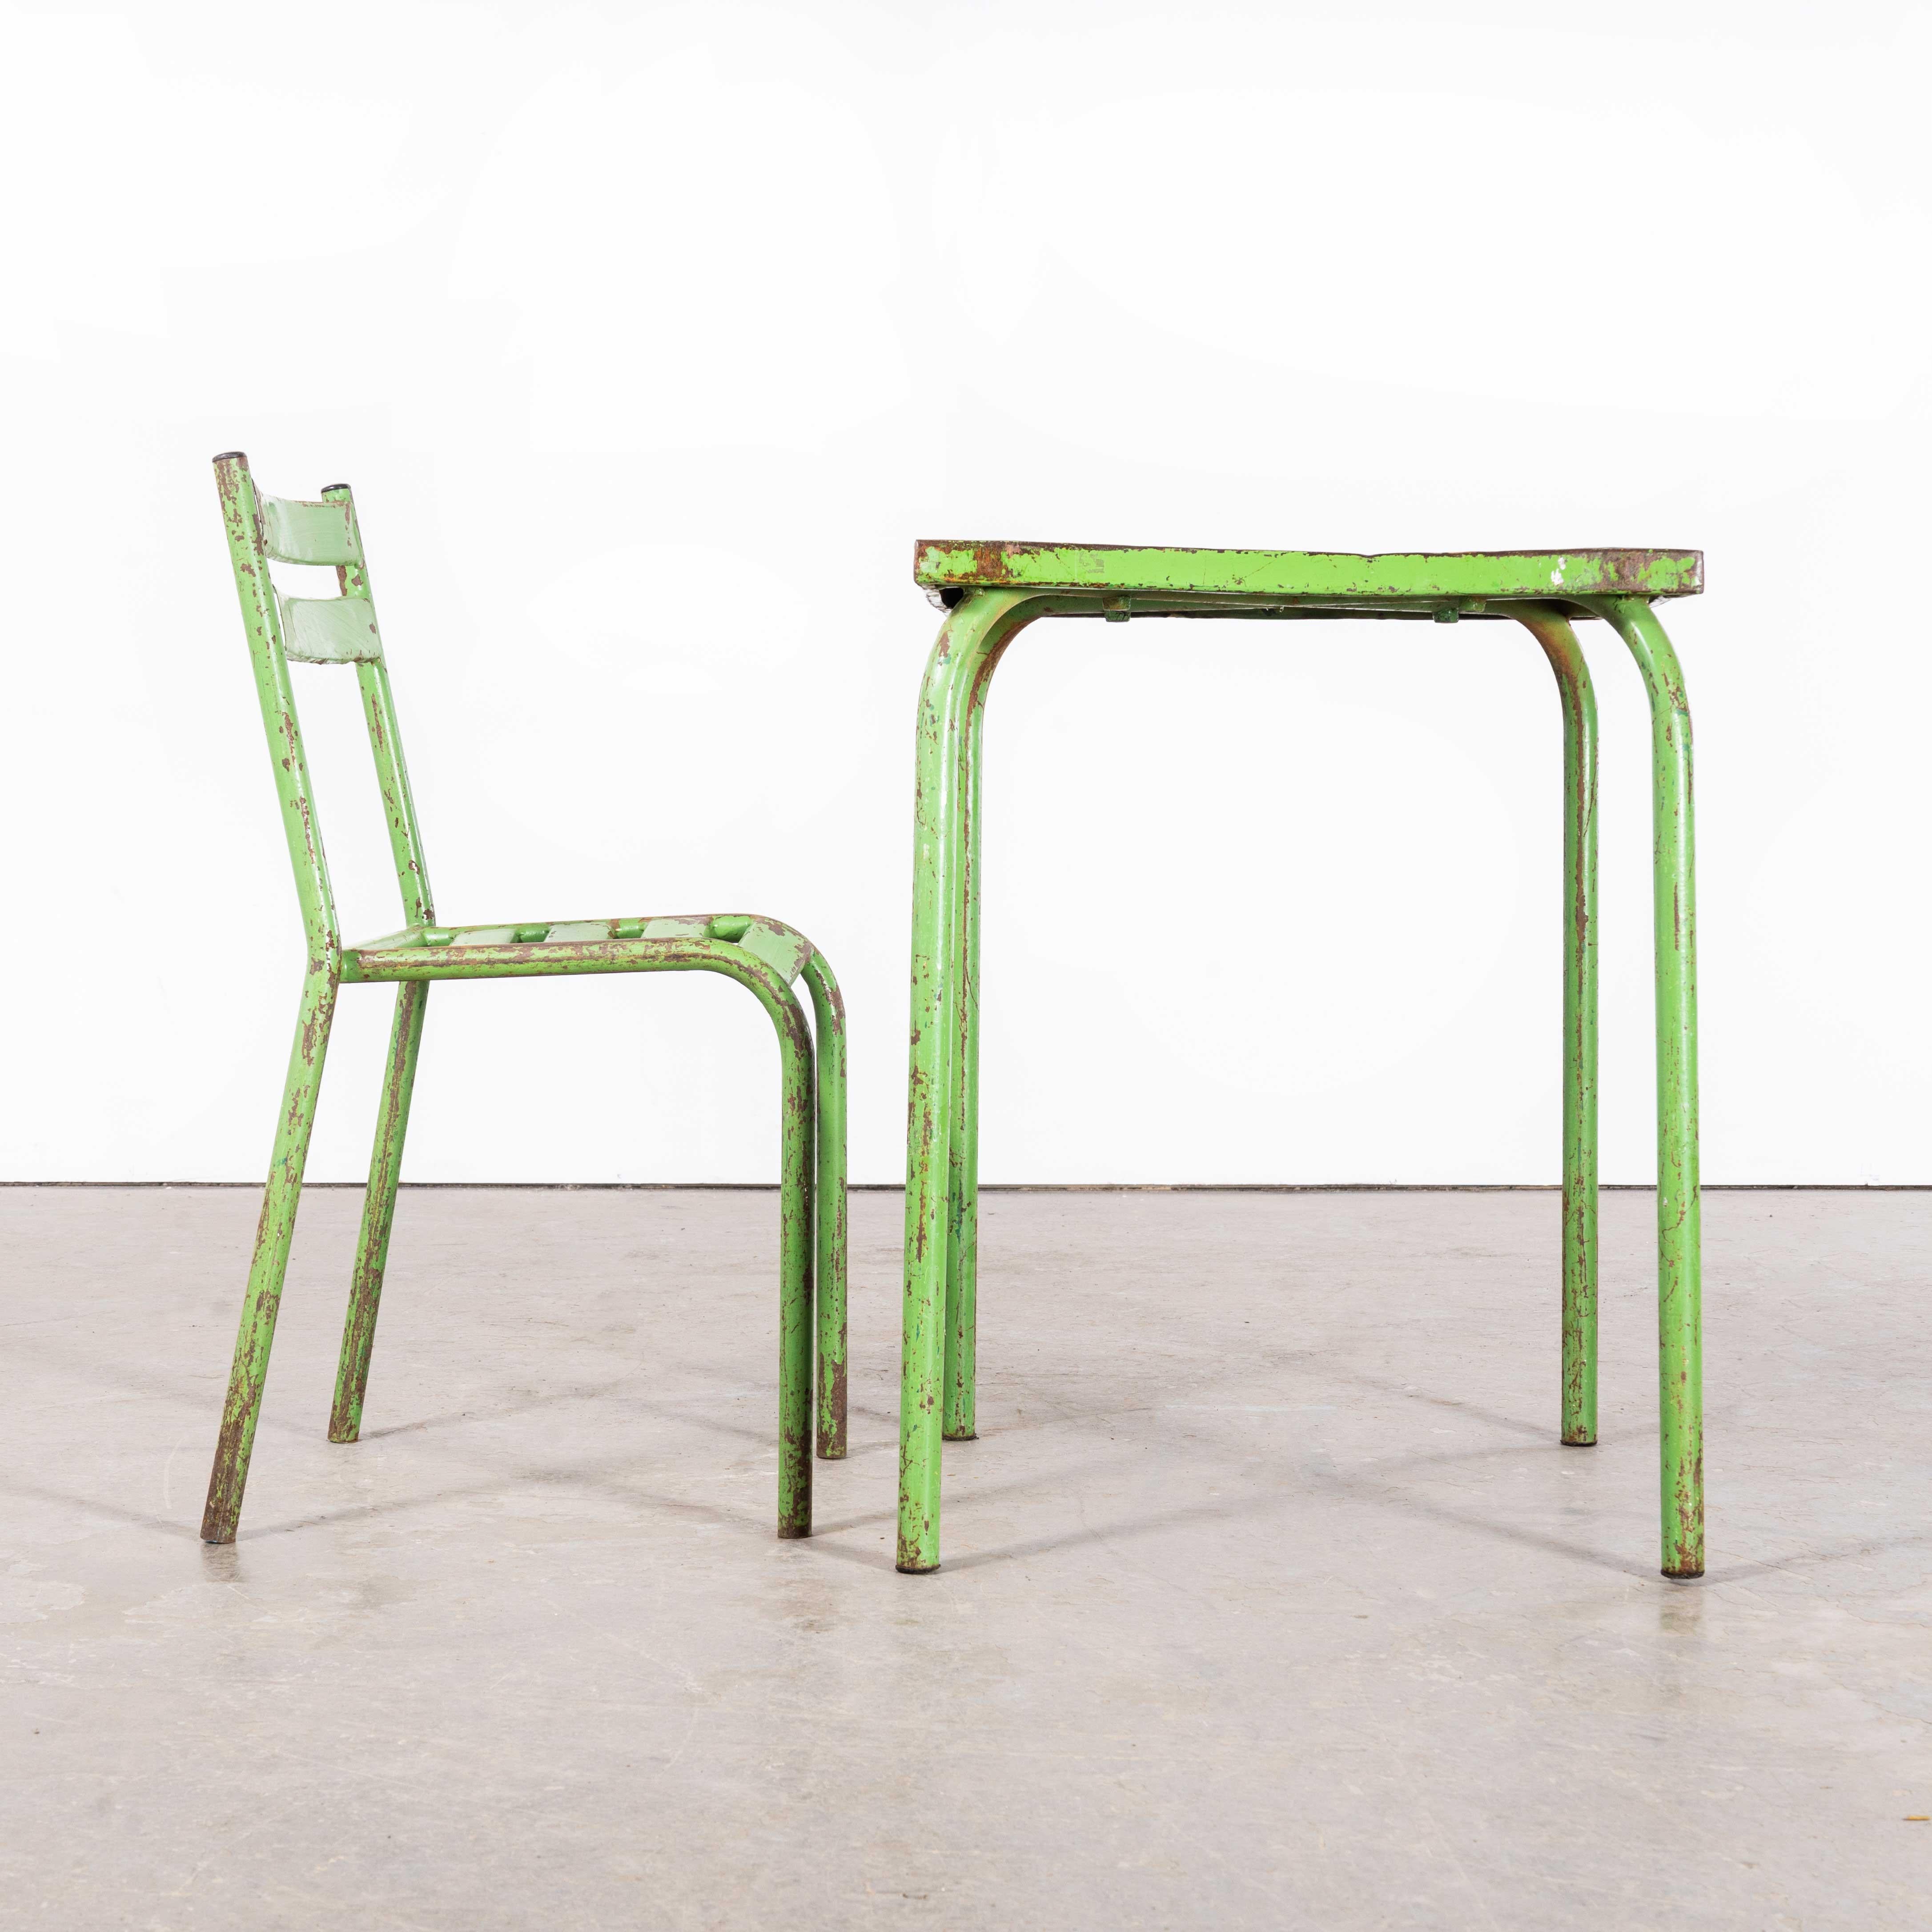 1950’s Original French Outdoor Table And Chair Set – Four Chairs
1950’s Original French Outdoor Table And Chair Set – Four Chairs. This listing is for one green metal table and four matching green metal garden chairs. The chairs are classic Toledo